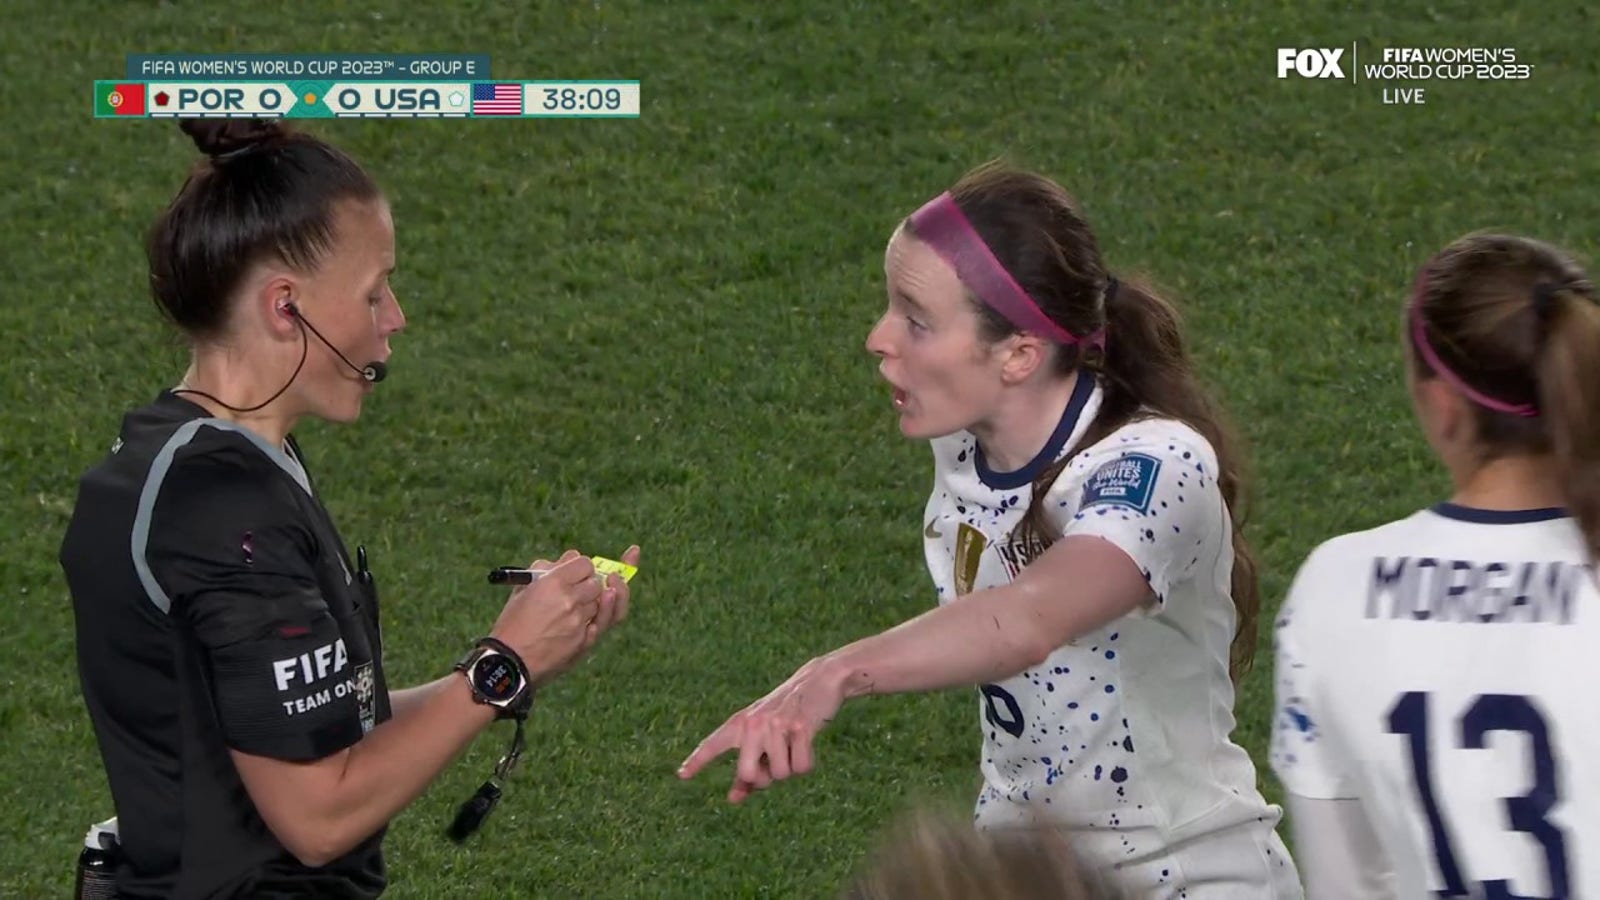 USWNT's Rose Lavelle receives a yellow card vs. Portugal and is out for team's next game if it advances